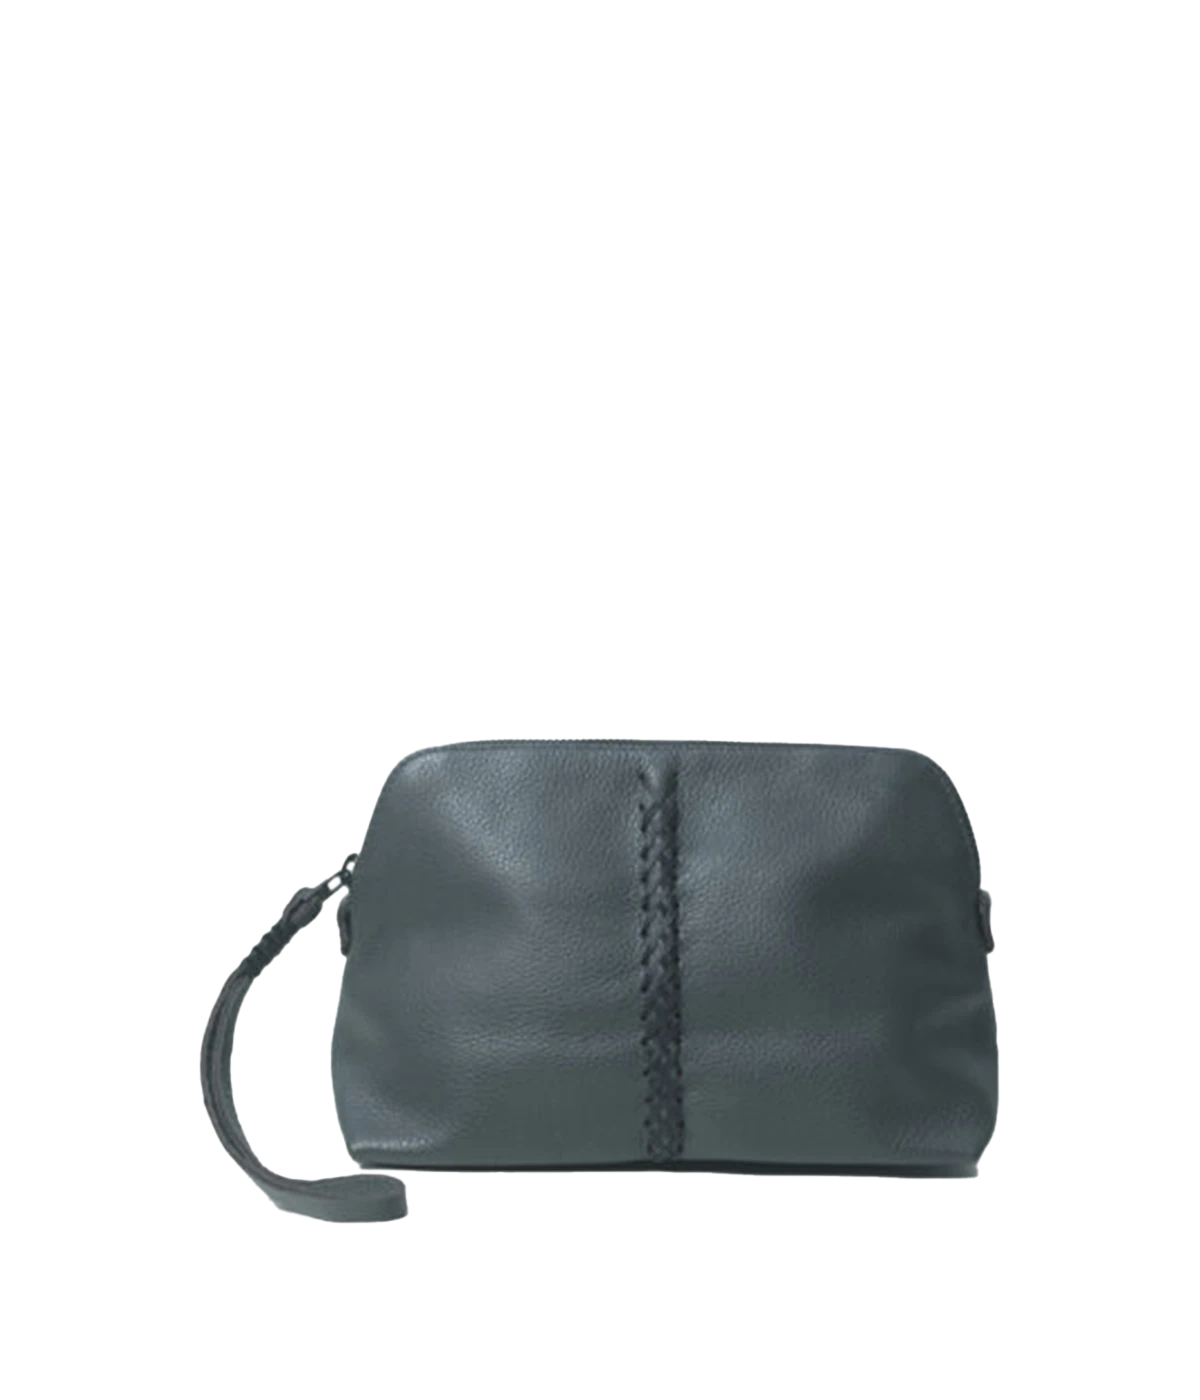 An essential vanity case in charcoal featuring 100% leather,  signature leather handstitching, wrist strap, full lining. Makeup bag, travel essential, everyday extra bag, Made in Greece, luxury leather, everyday work bag, mum bag throw on and go.